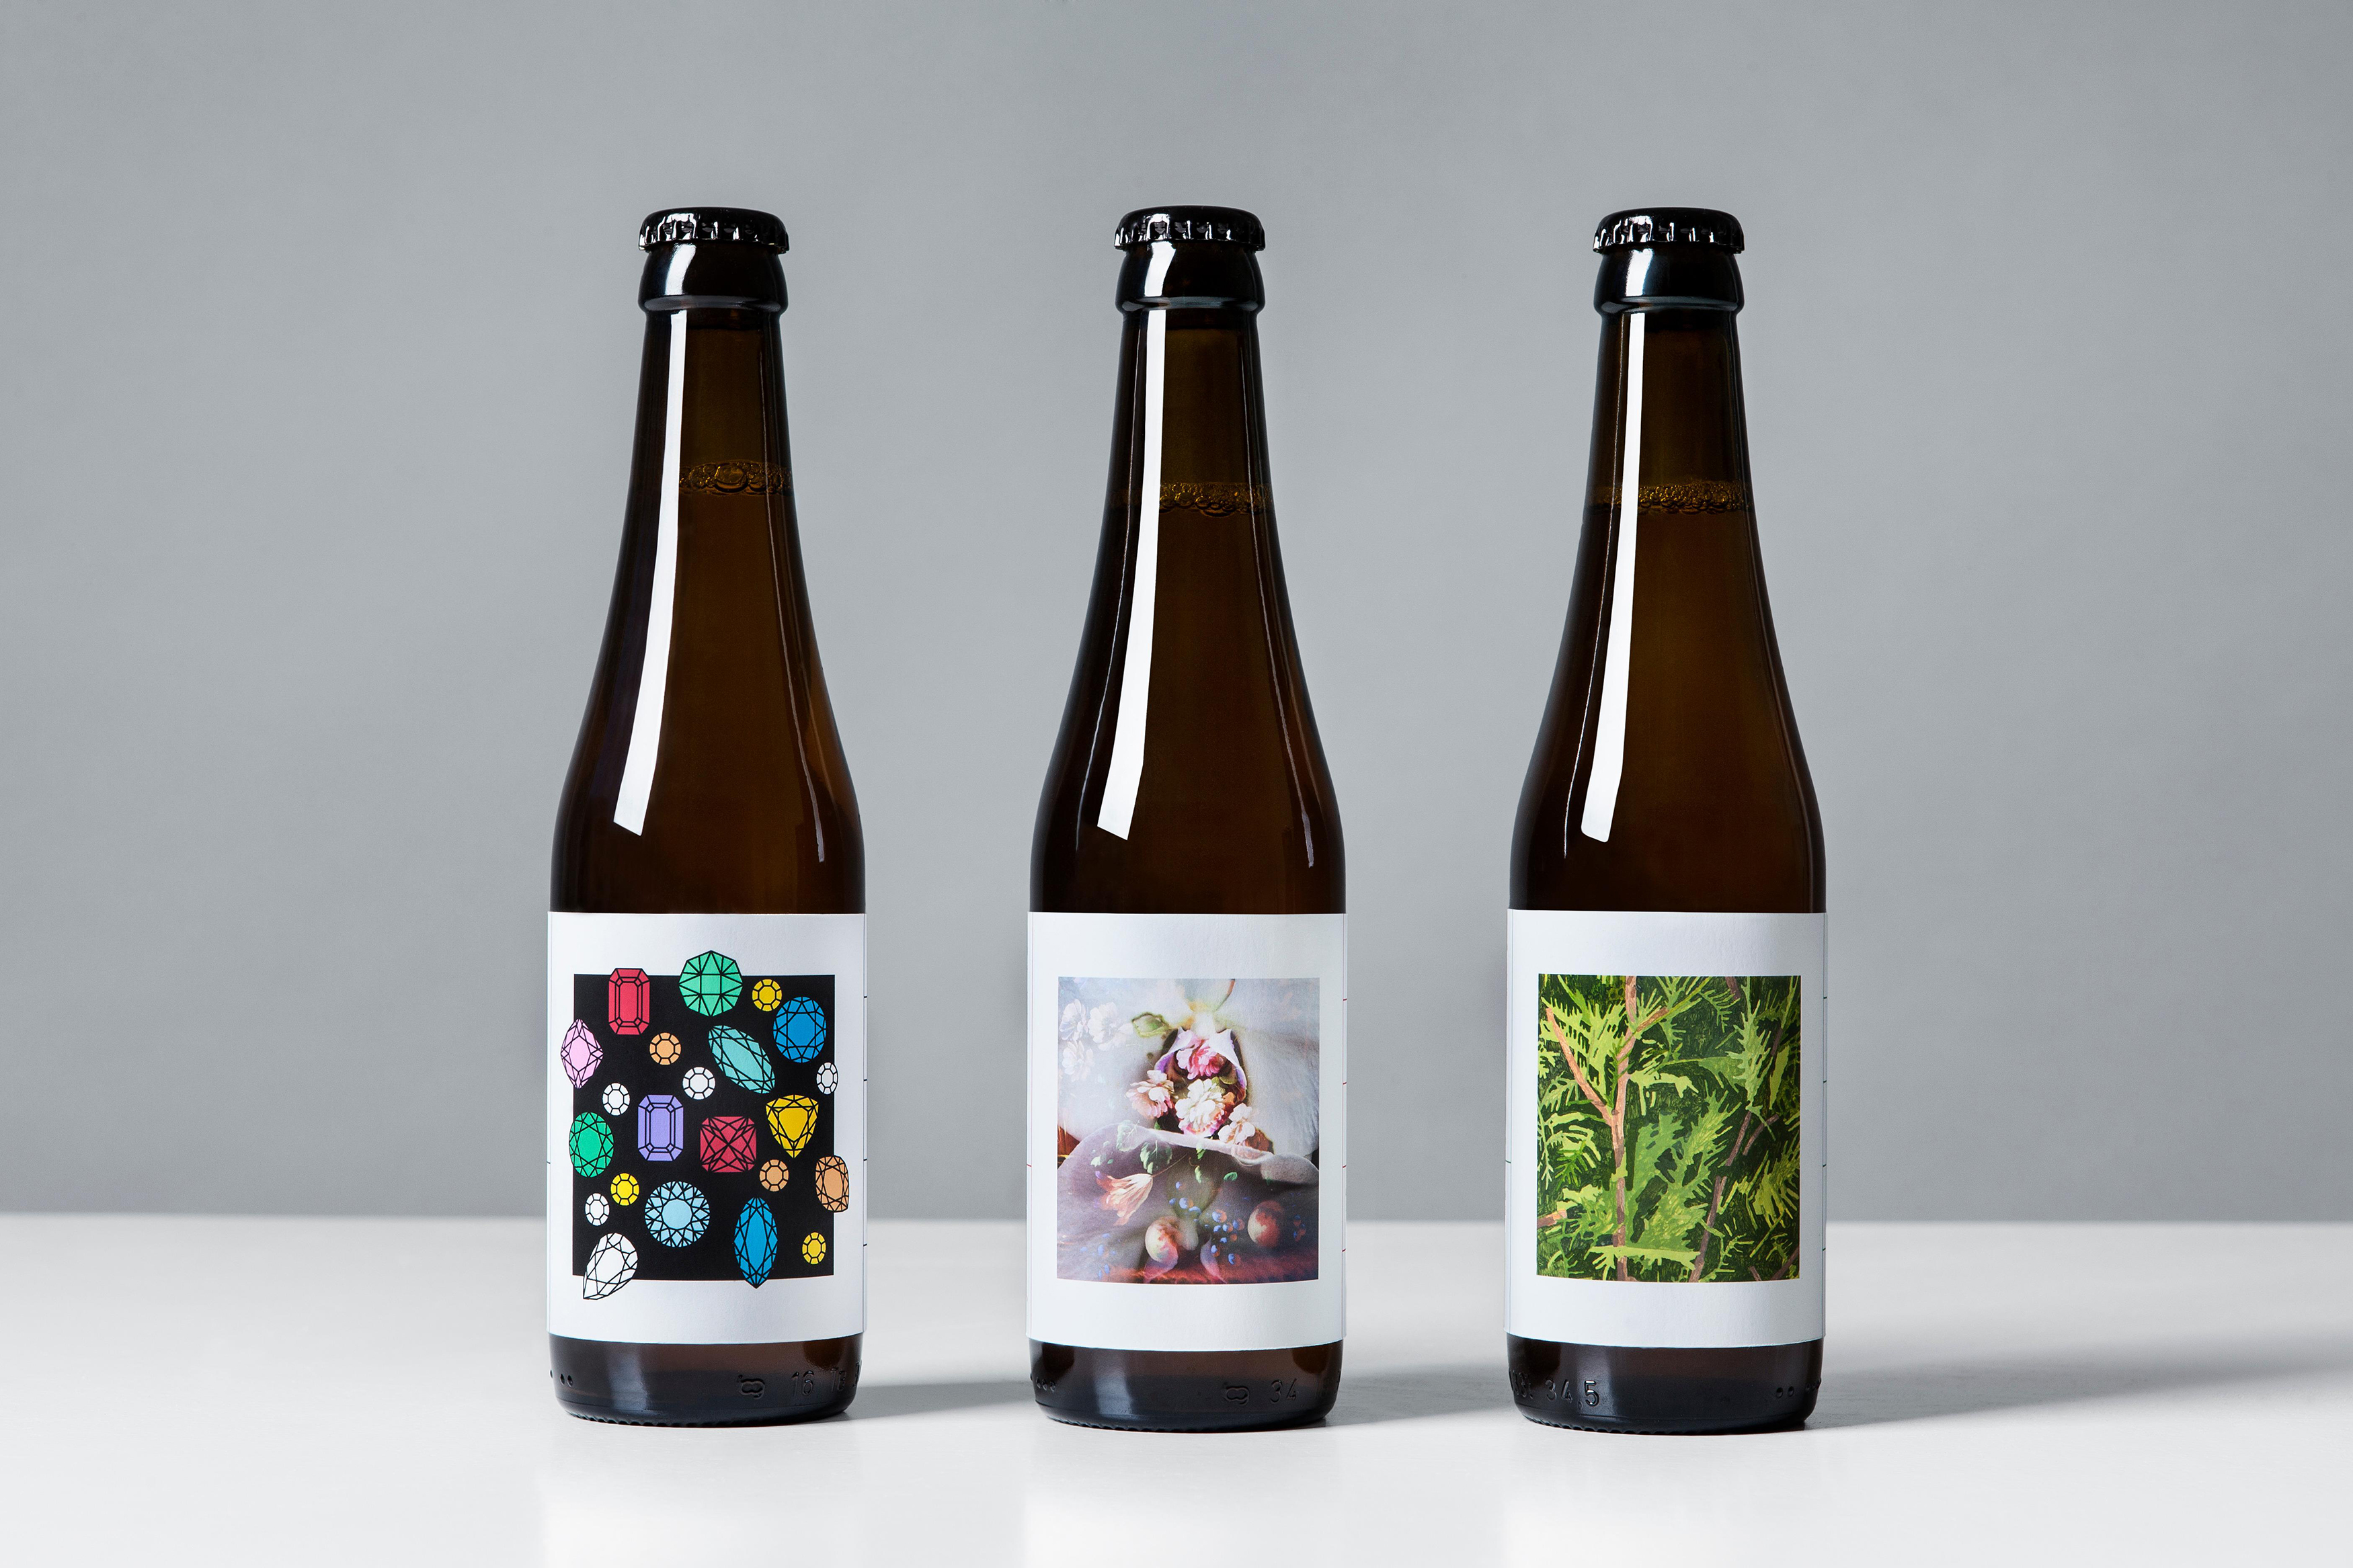 Packaging for O/O Brewing by Swedish graphic design studio Lundgren+Lindqvist